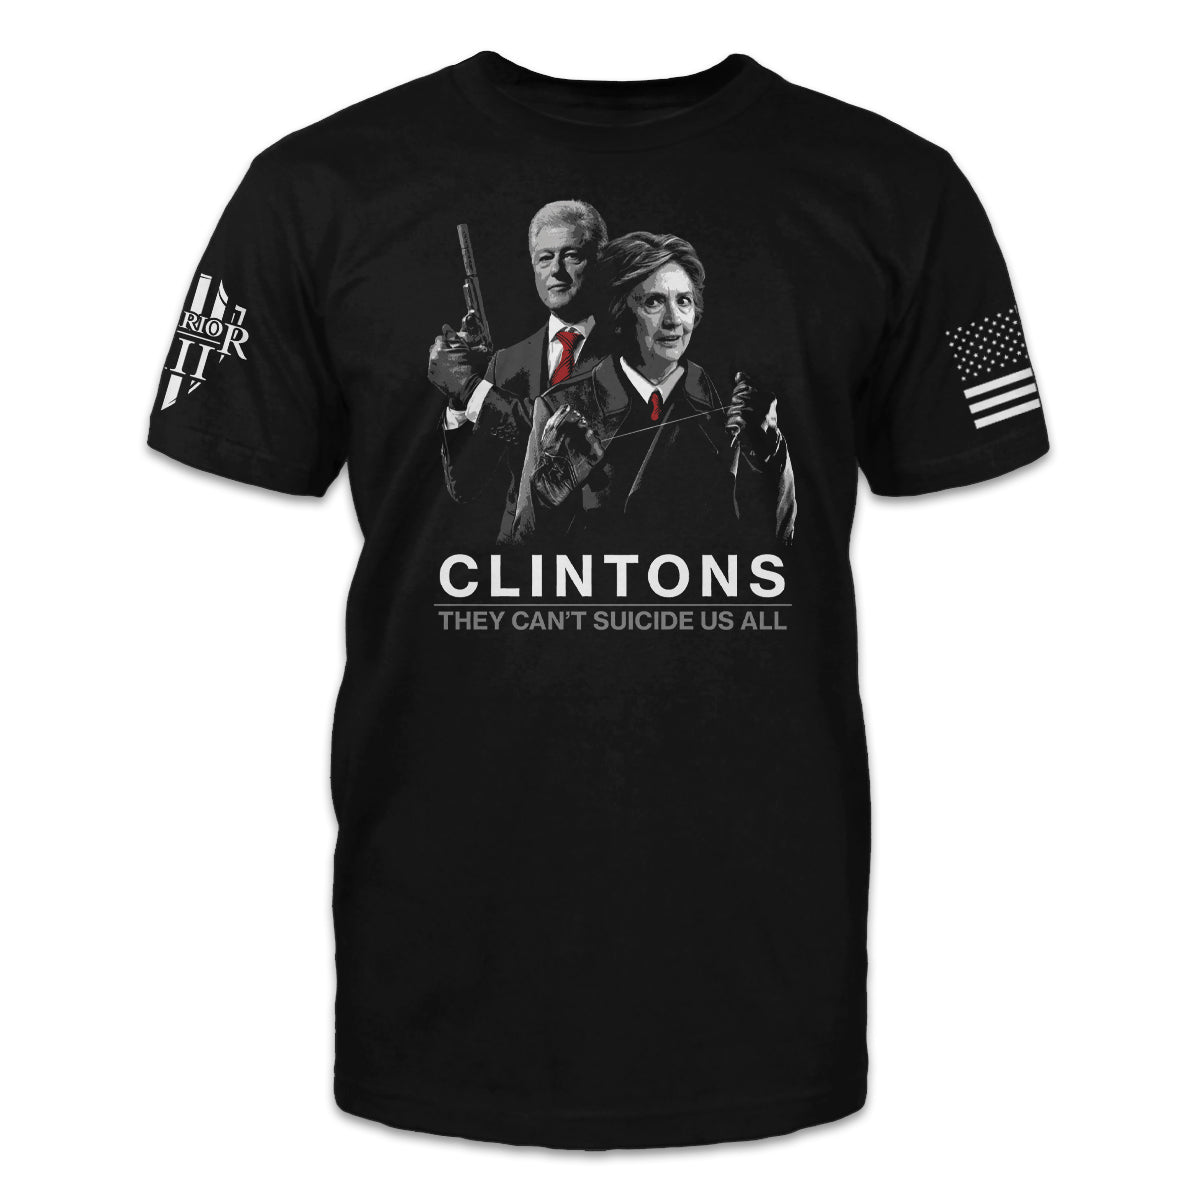 A black t-shirt with the Clintons and the words "Clintons - They Can't Suicide Us All" printed on the front of the shirt.